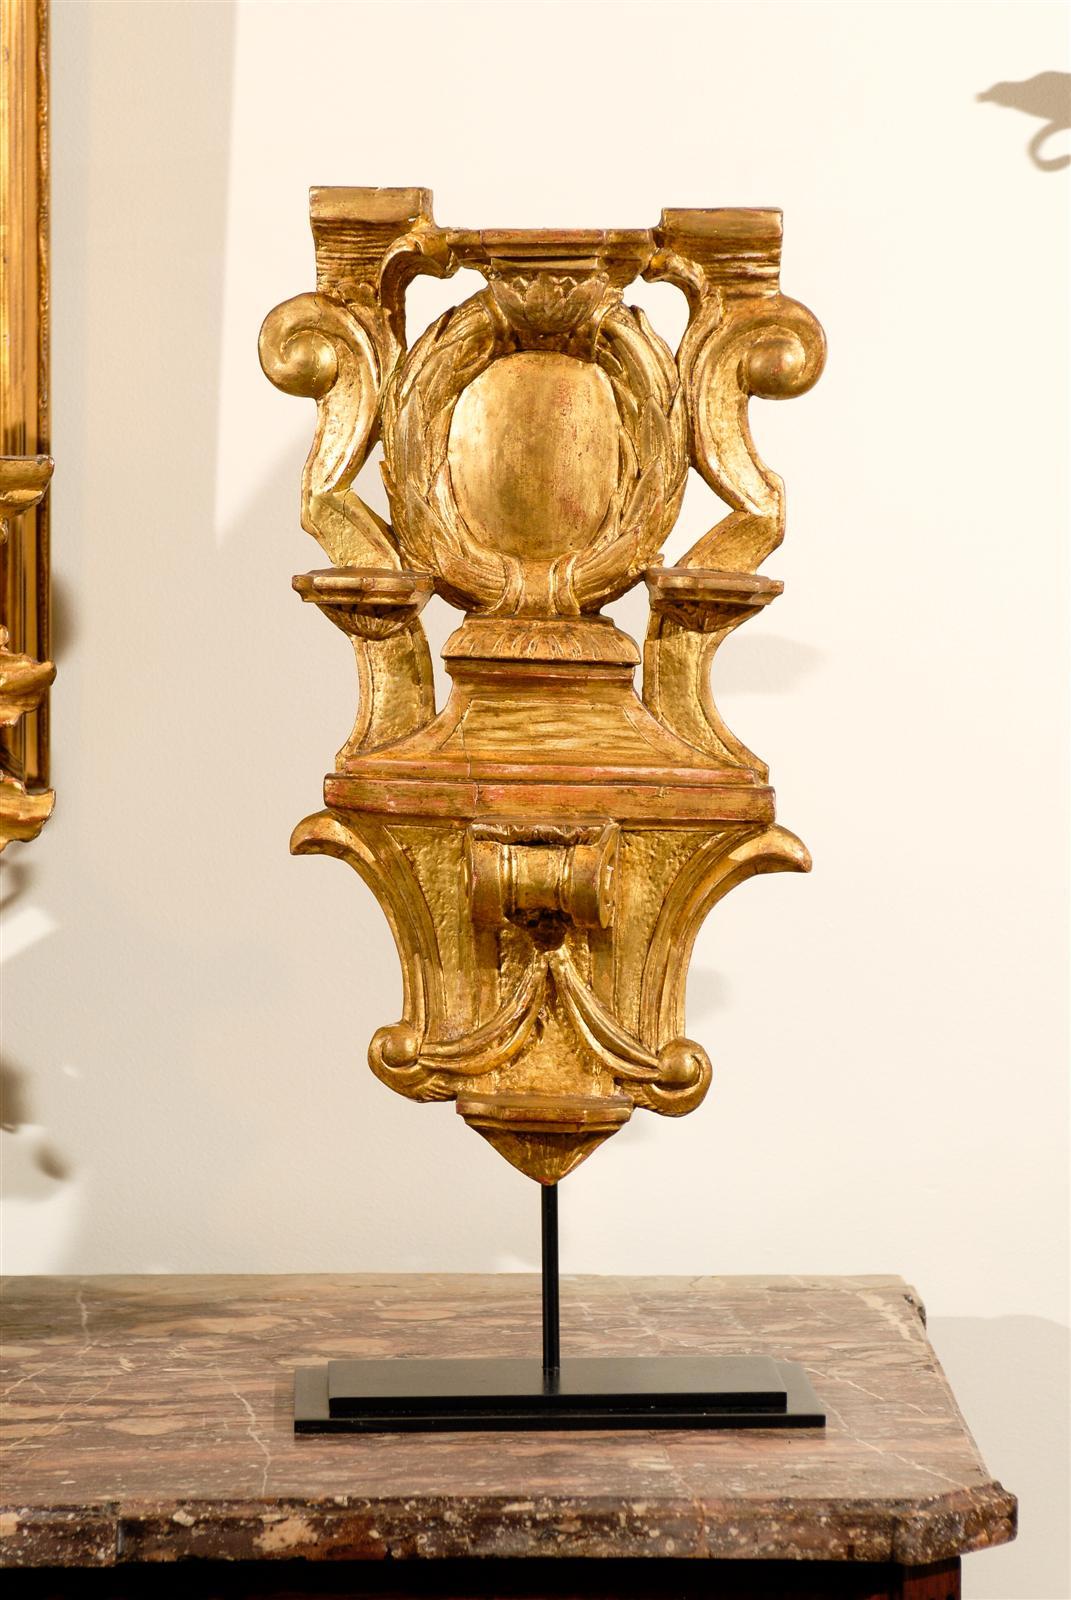 17th Century Gilded Wood Carving on Stand, Circa 1680
The center of a sideboard would be a great place for this sizable, well proportioned beauty. The very old finish with the red undercoat is what makes special. It is wonderful alone butt has five